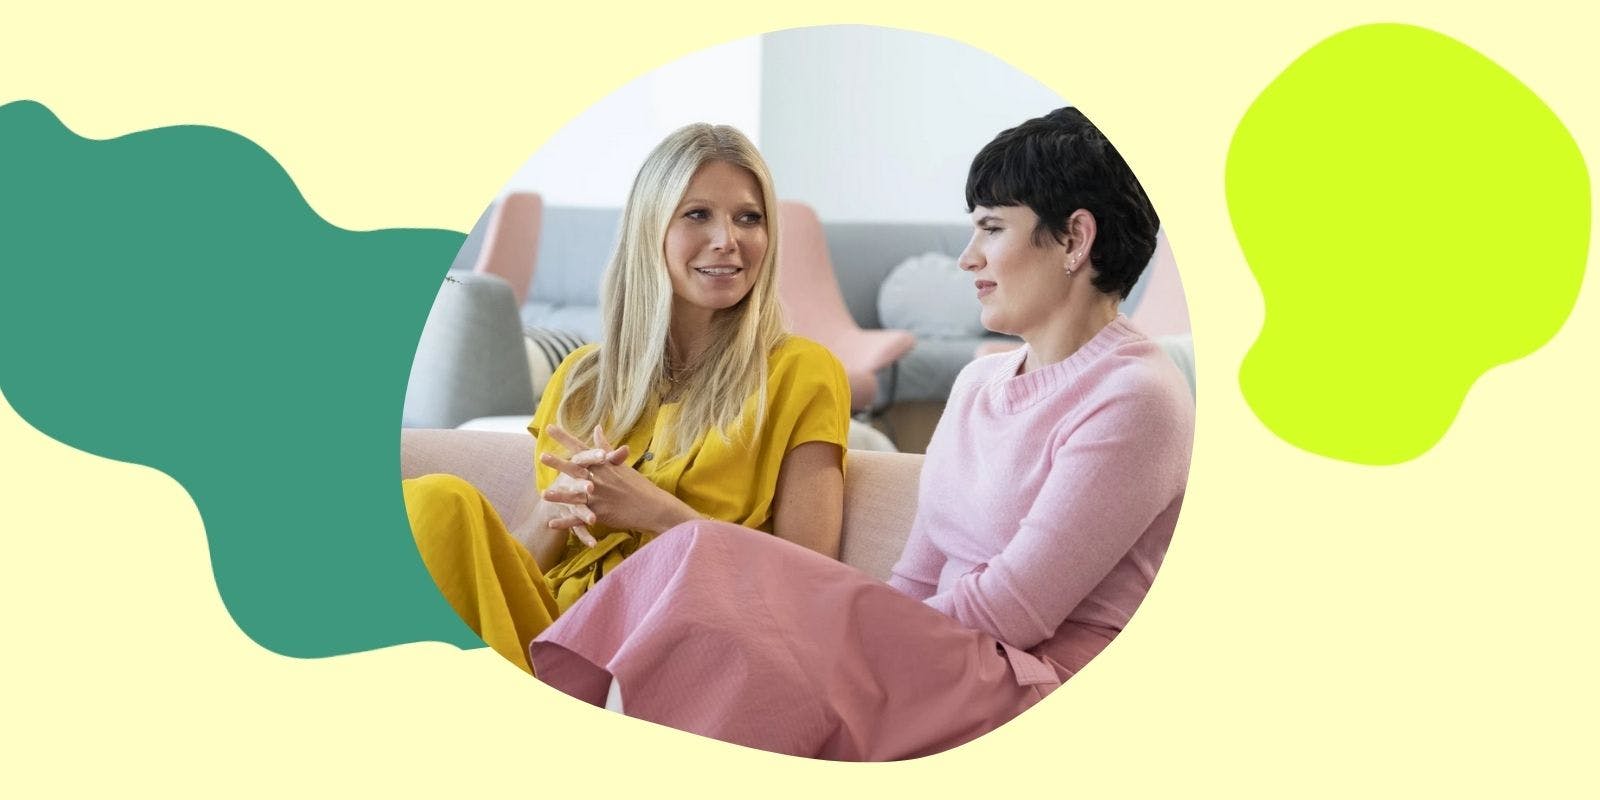 Let's Talk About The Goop Lab Episode On Vaginas